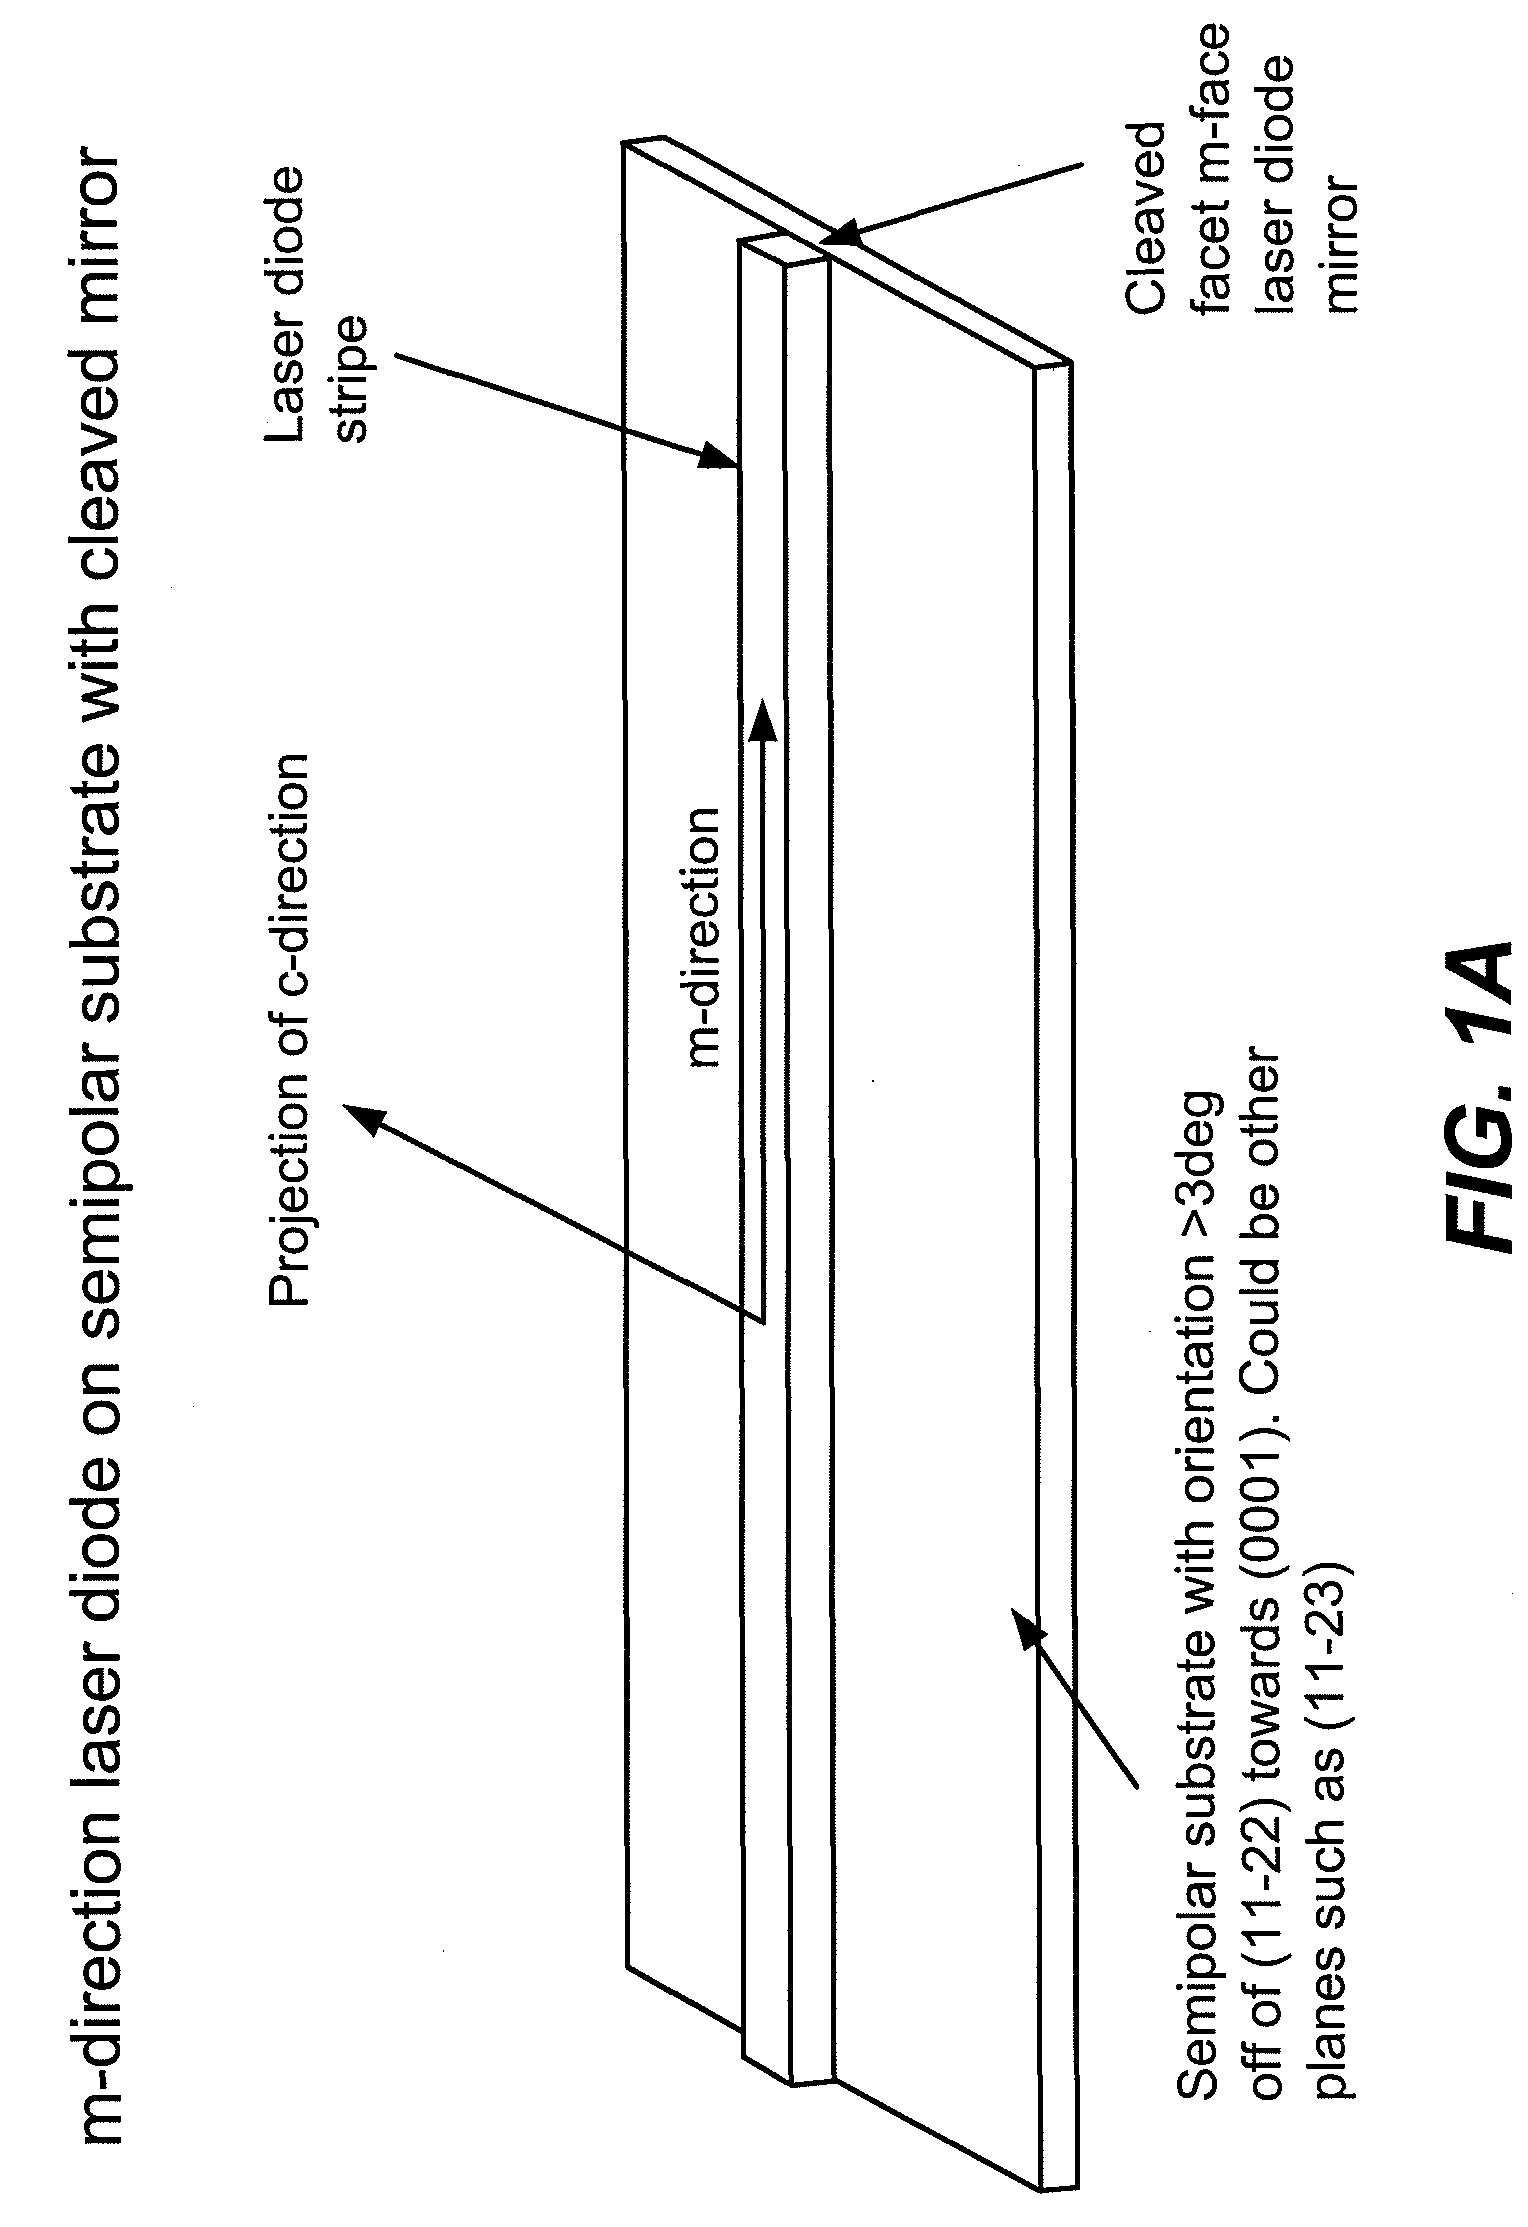 Optical device structure using GaN substrates and growth structures for laser applications of emissions of 500 nm and greater